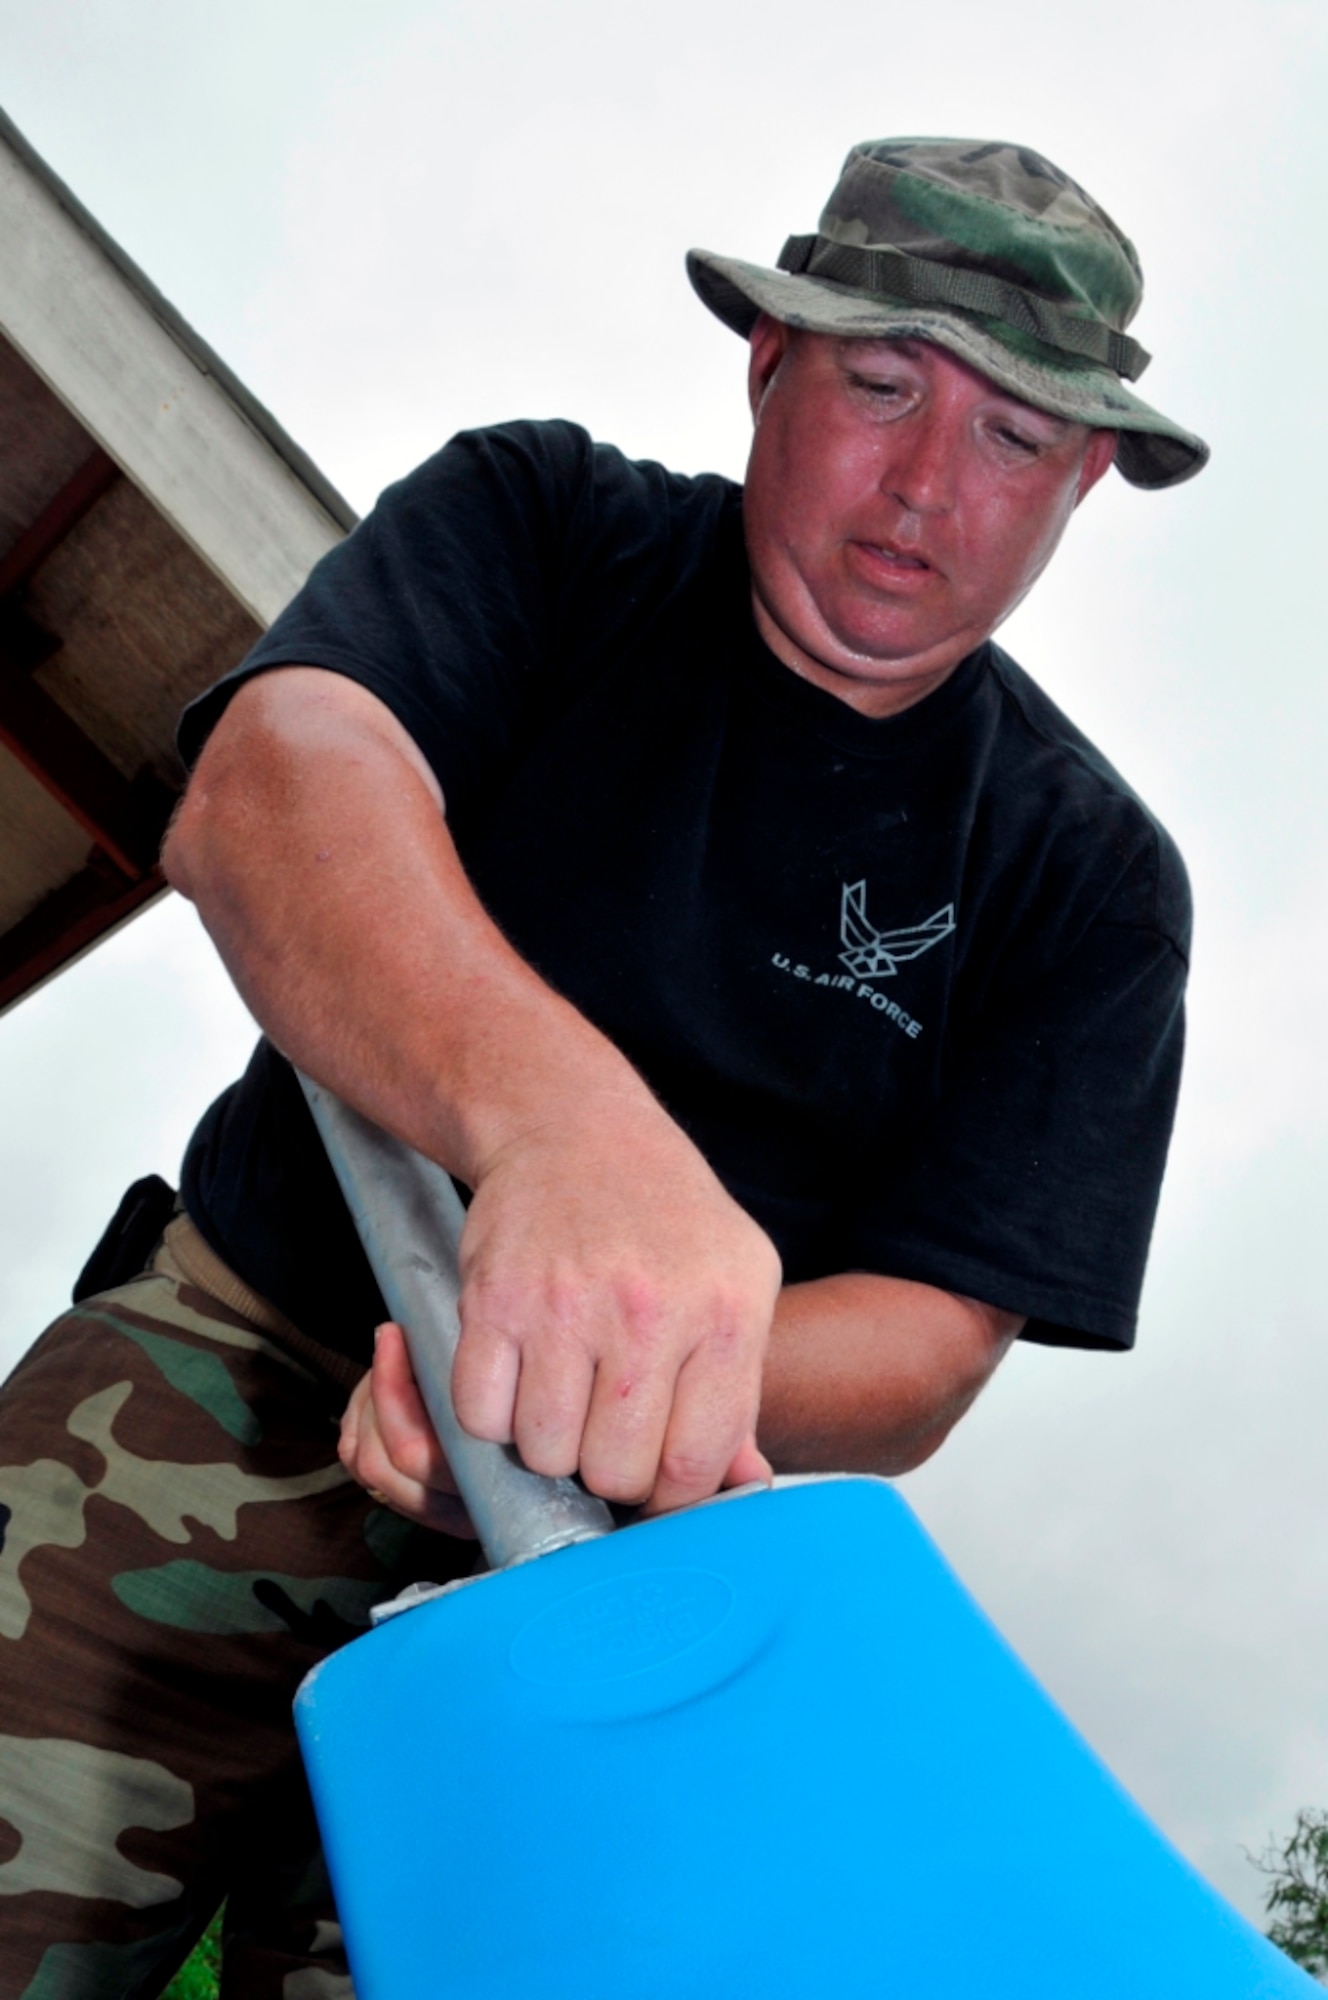 U.S. Air Force Senior Master Sgt. Robert Gilligan, a heavy equipment superintendent with the 301st Civil Engineer Squadron (CES), Naval Air Station Joint Reserve Base Fort Worth, Texas, builds a slide for a new playground in Georgetown, Guyana, July 10, 2009. Airmen from the 301st CES deployed to Guyana for two weeks to renovate the Timehri Primary School and install two playgrounds for the children. (U.S. Air Force photo by Airman 1st Class Perry Aston/Released)